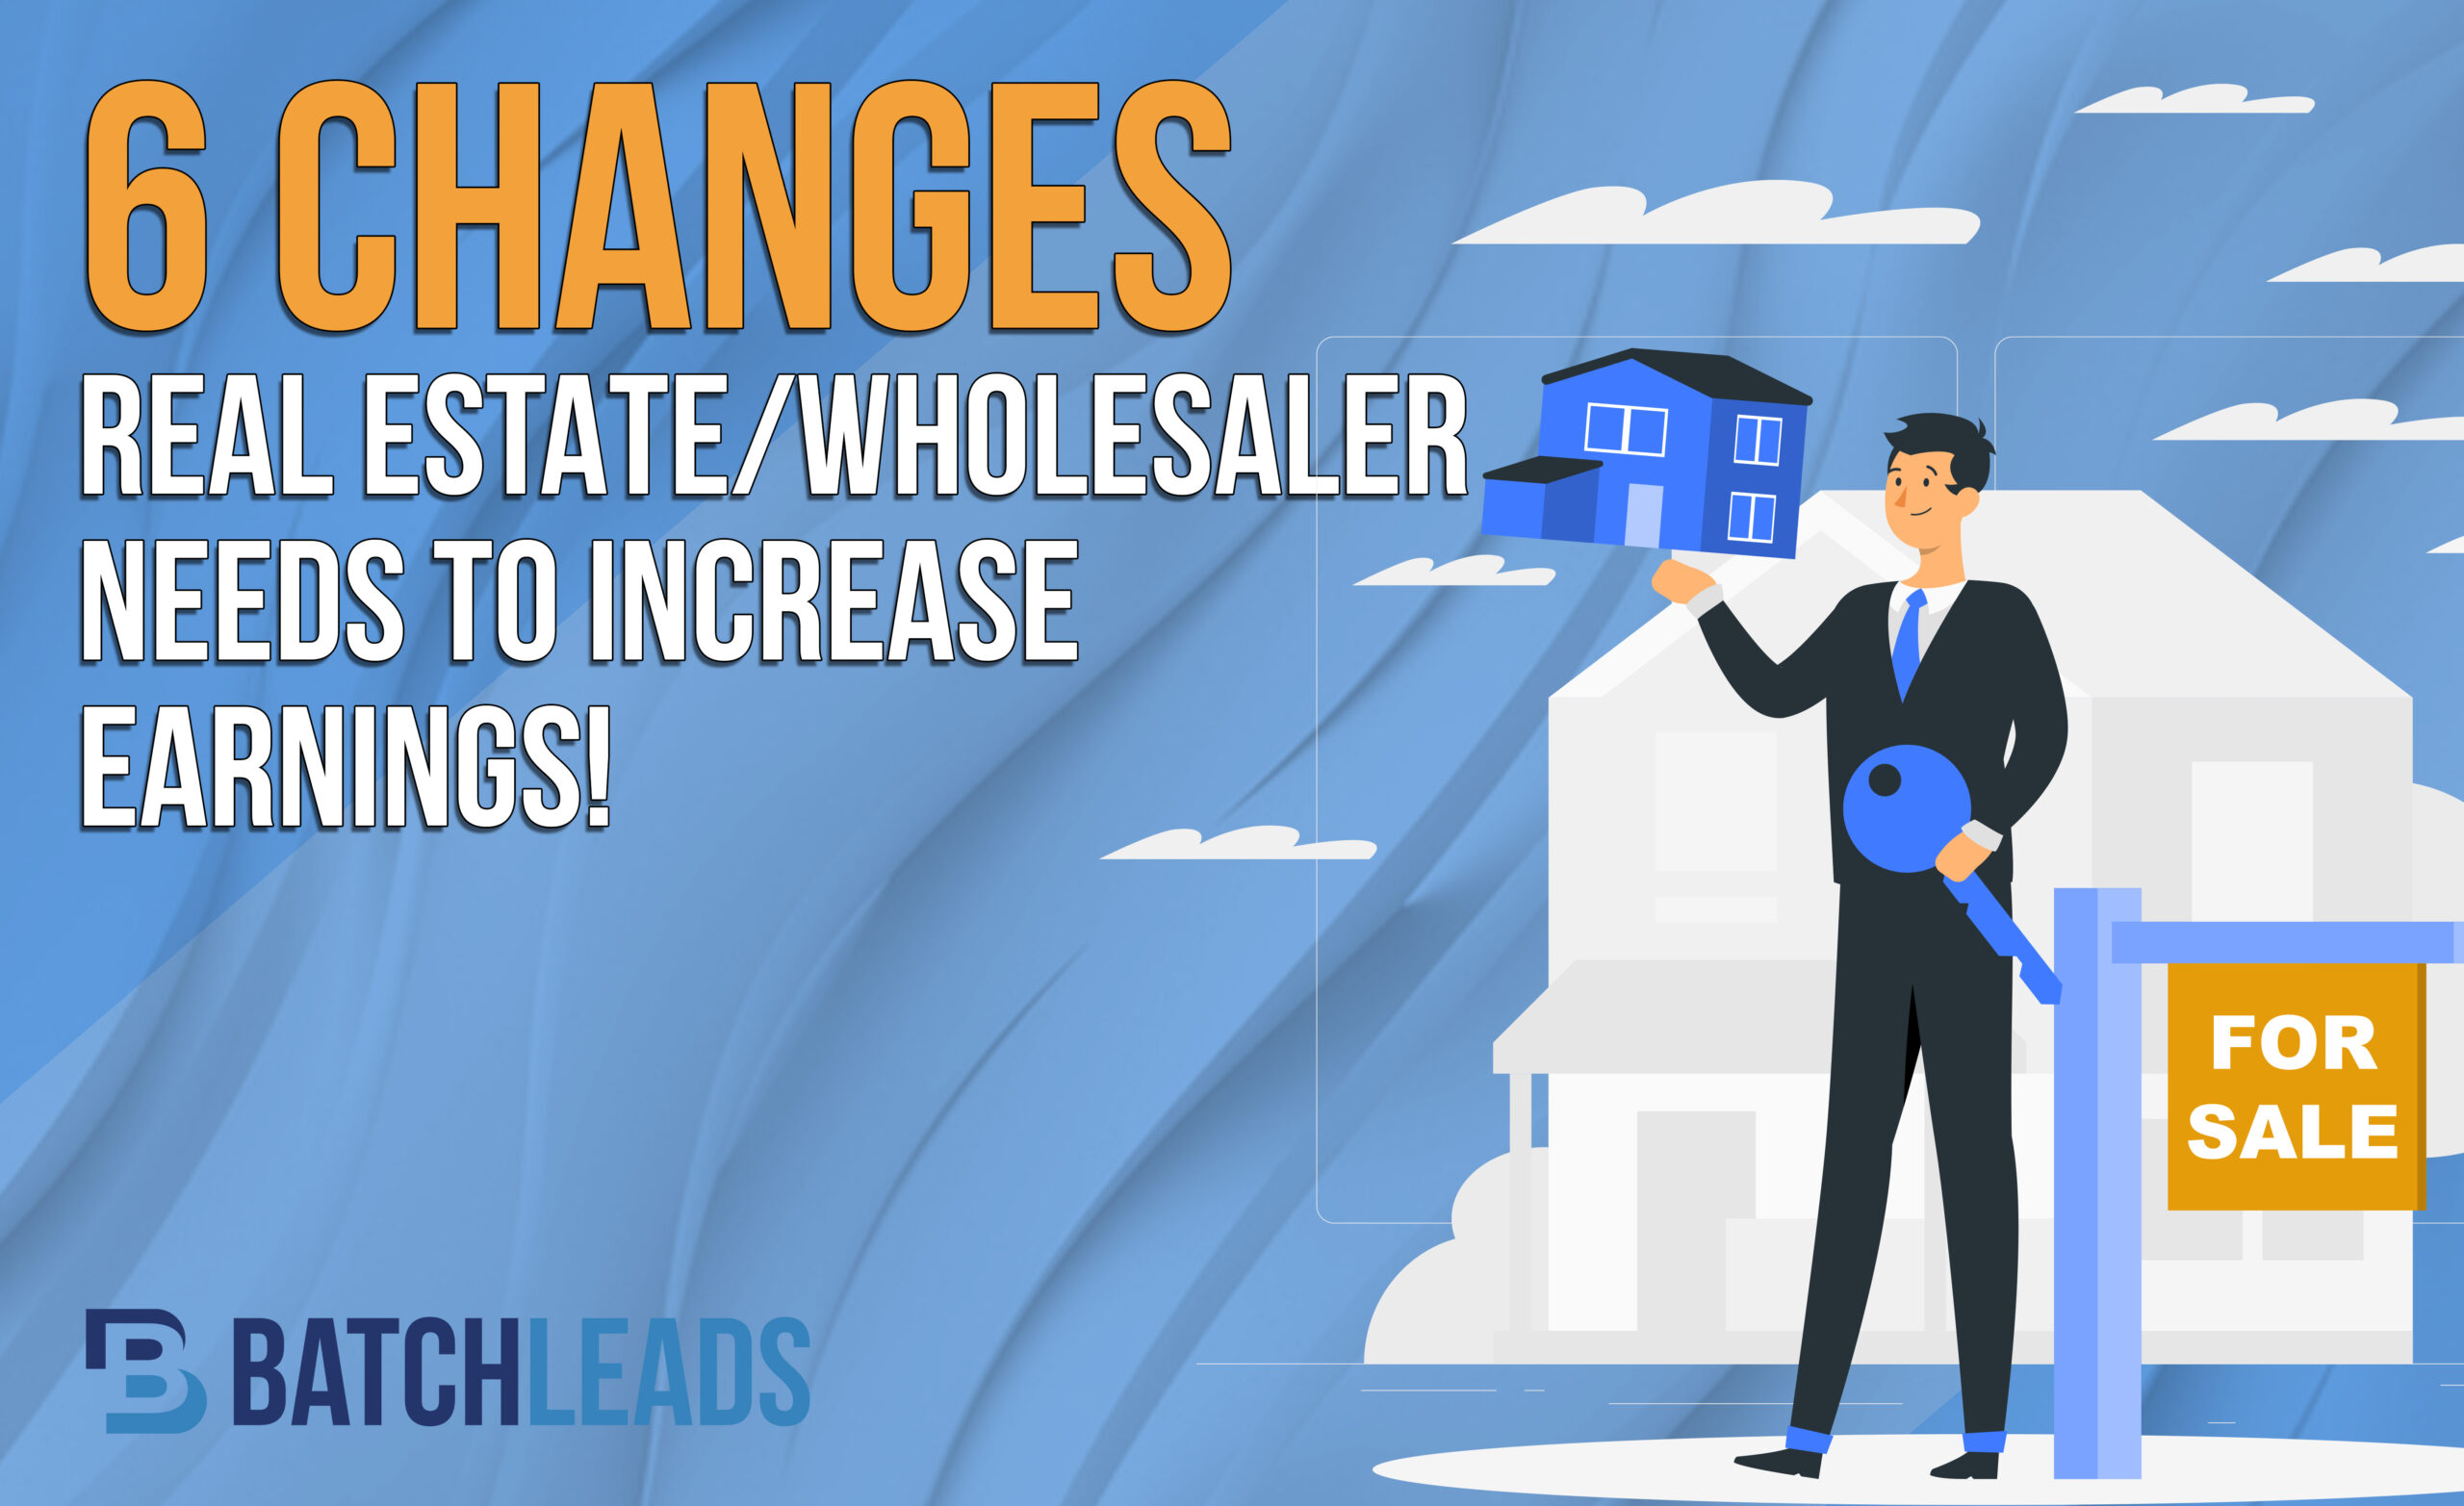 6 CHANGES EVERY REAL ESTATE WHOLESALER NEEDS TO INCREASE EARNINGS